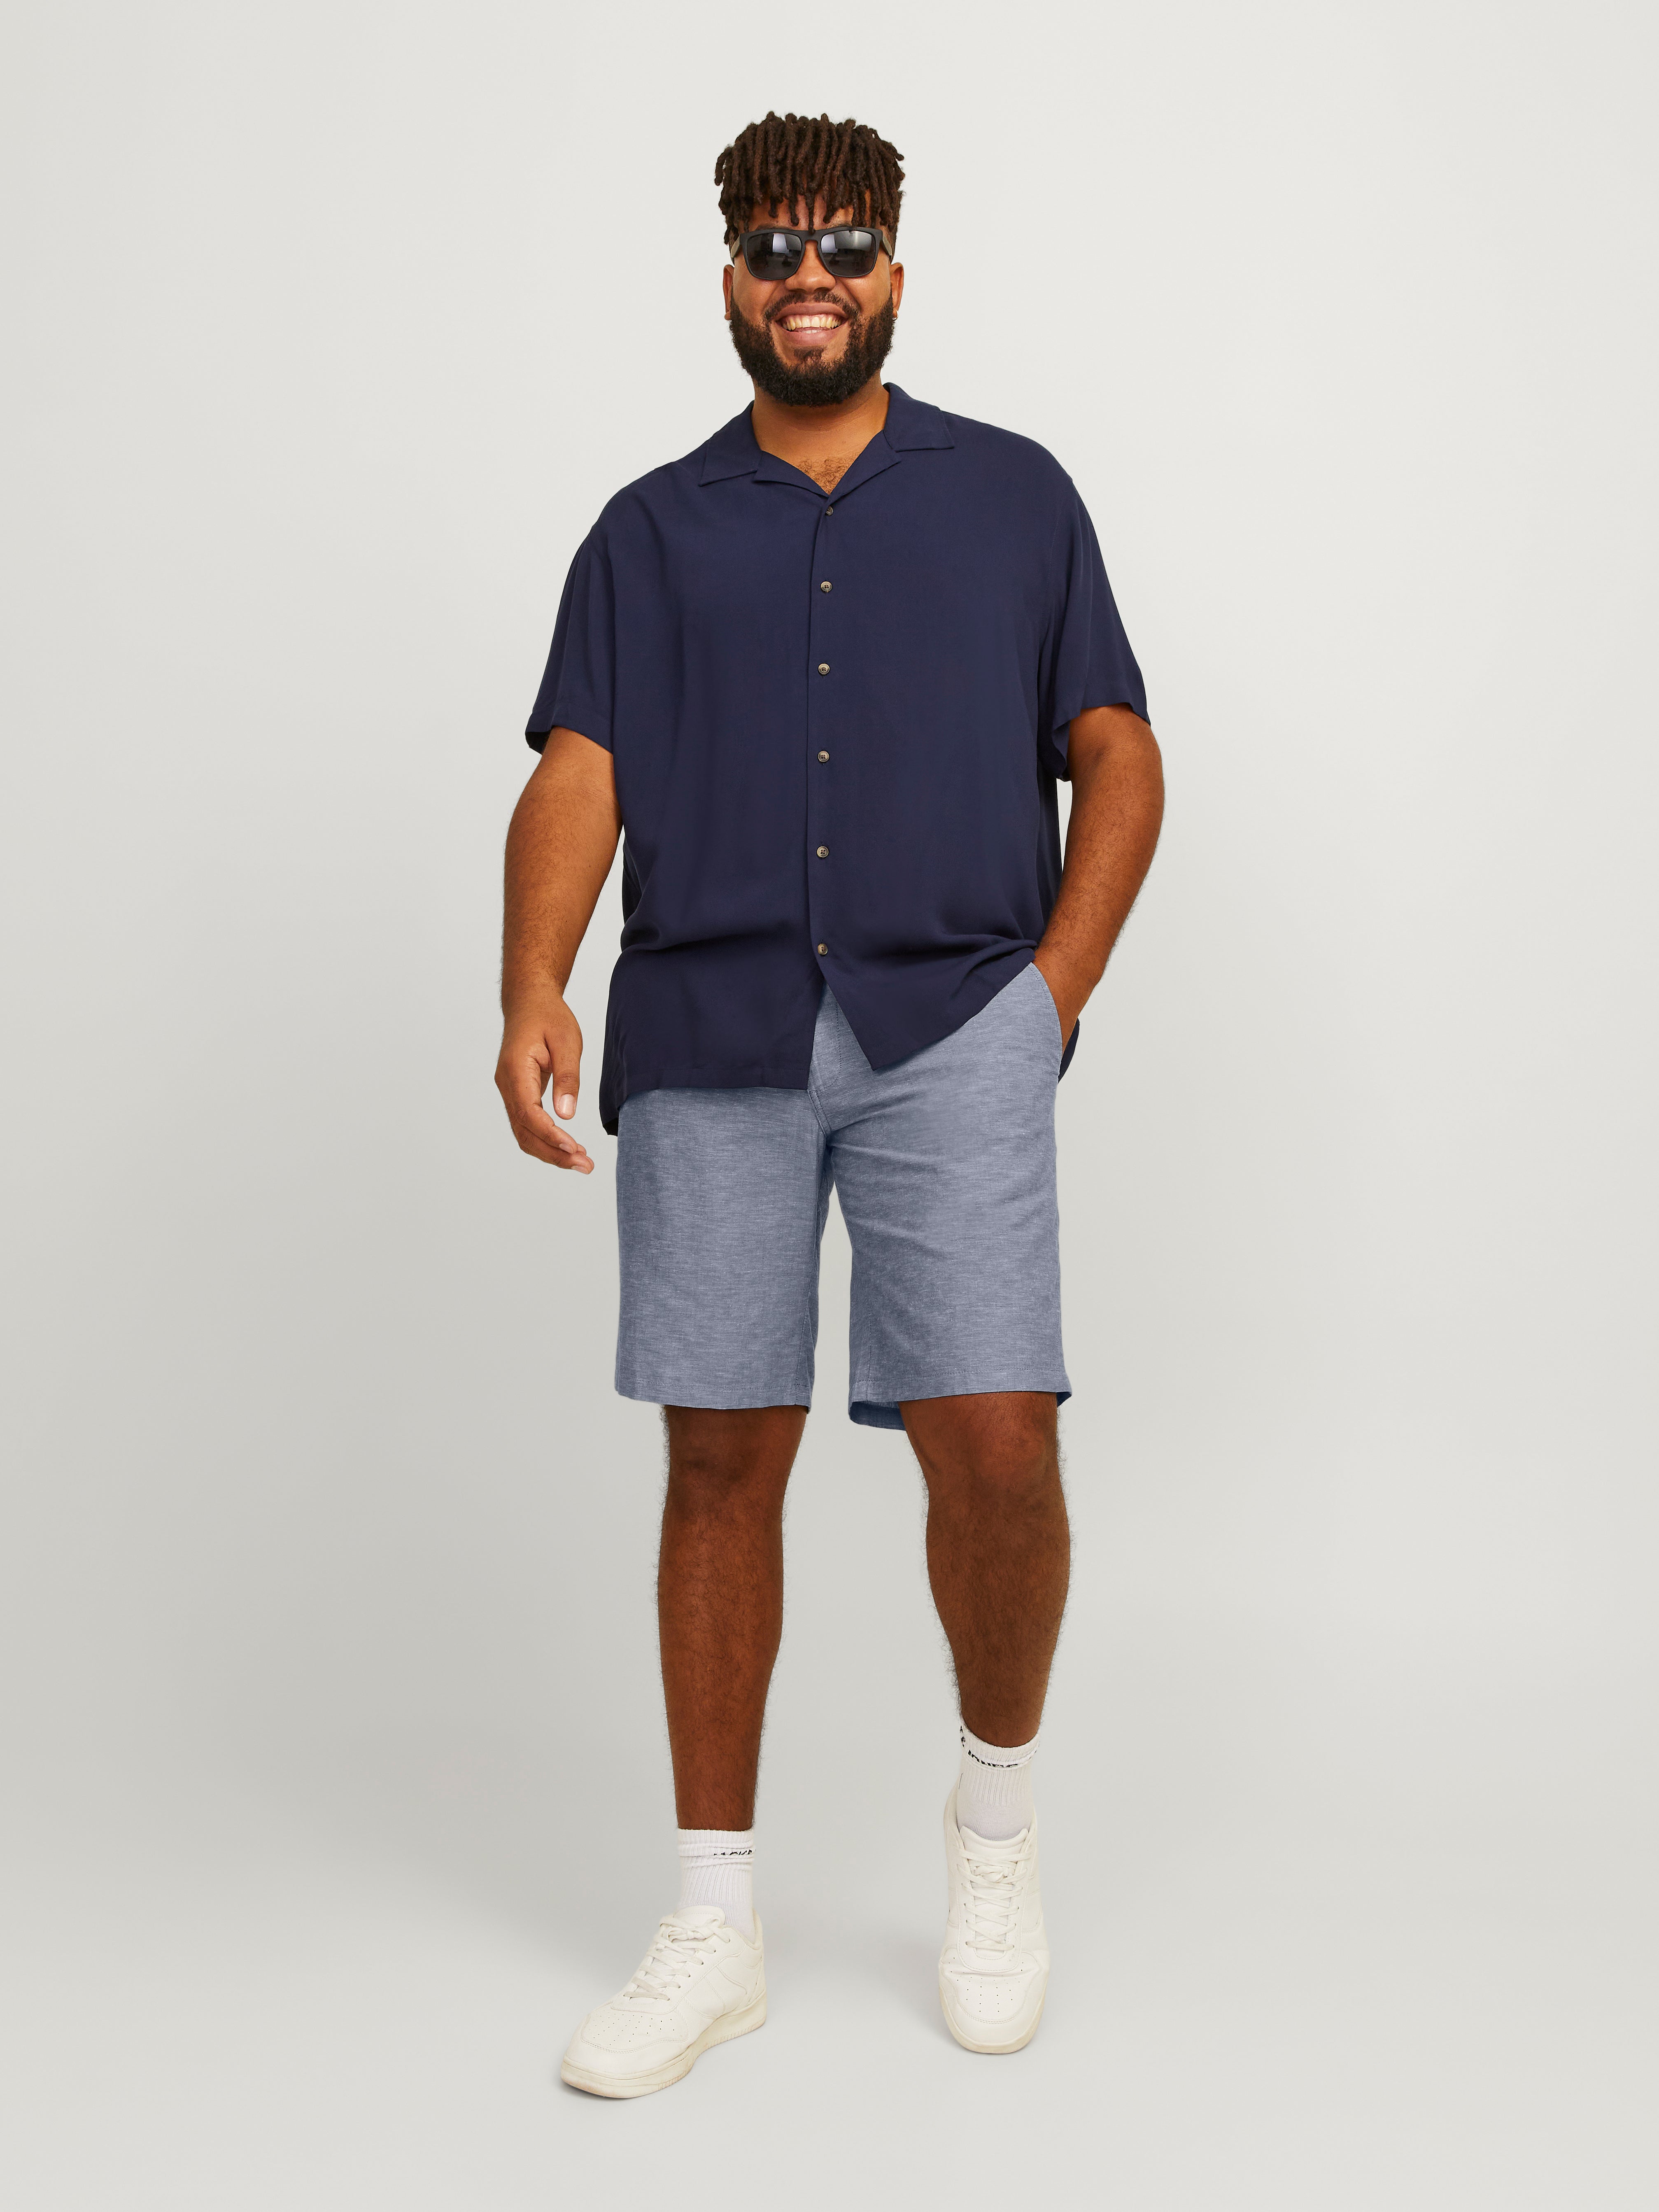 Plus Size Tapered Fit Calções Chino